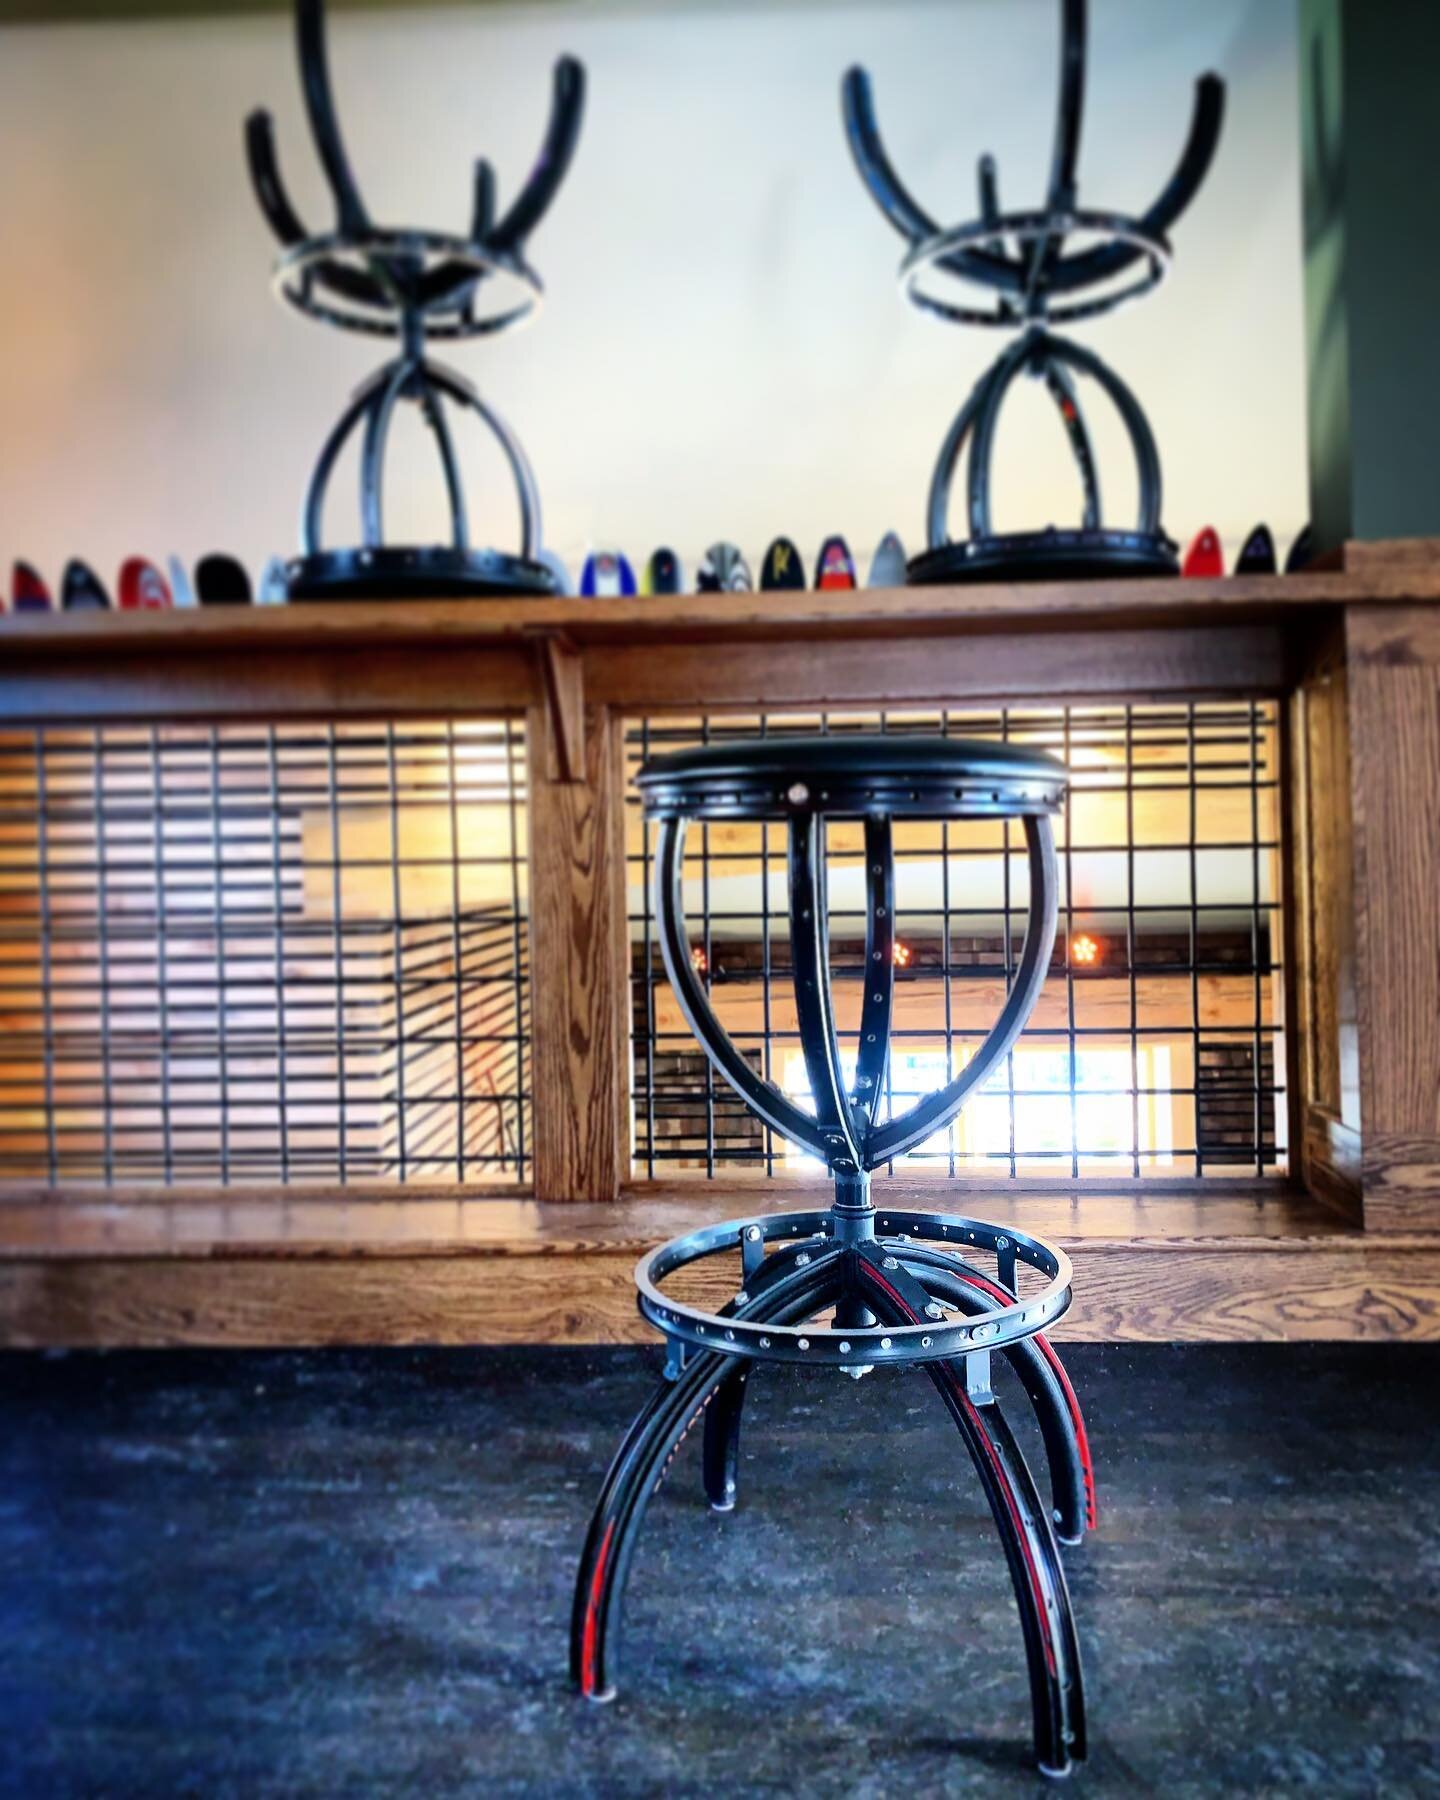 The freshest set of the new aluminum version of our Crown swivel barstools are trickling into the new expansion at @blackrocksbrewery 
Bicycle headsets from @fsa_mtb provide an ultra smooth swivel. 
#bikefurniture #restaurantdesign #retaildesign #hot